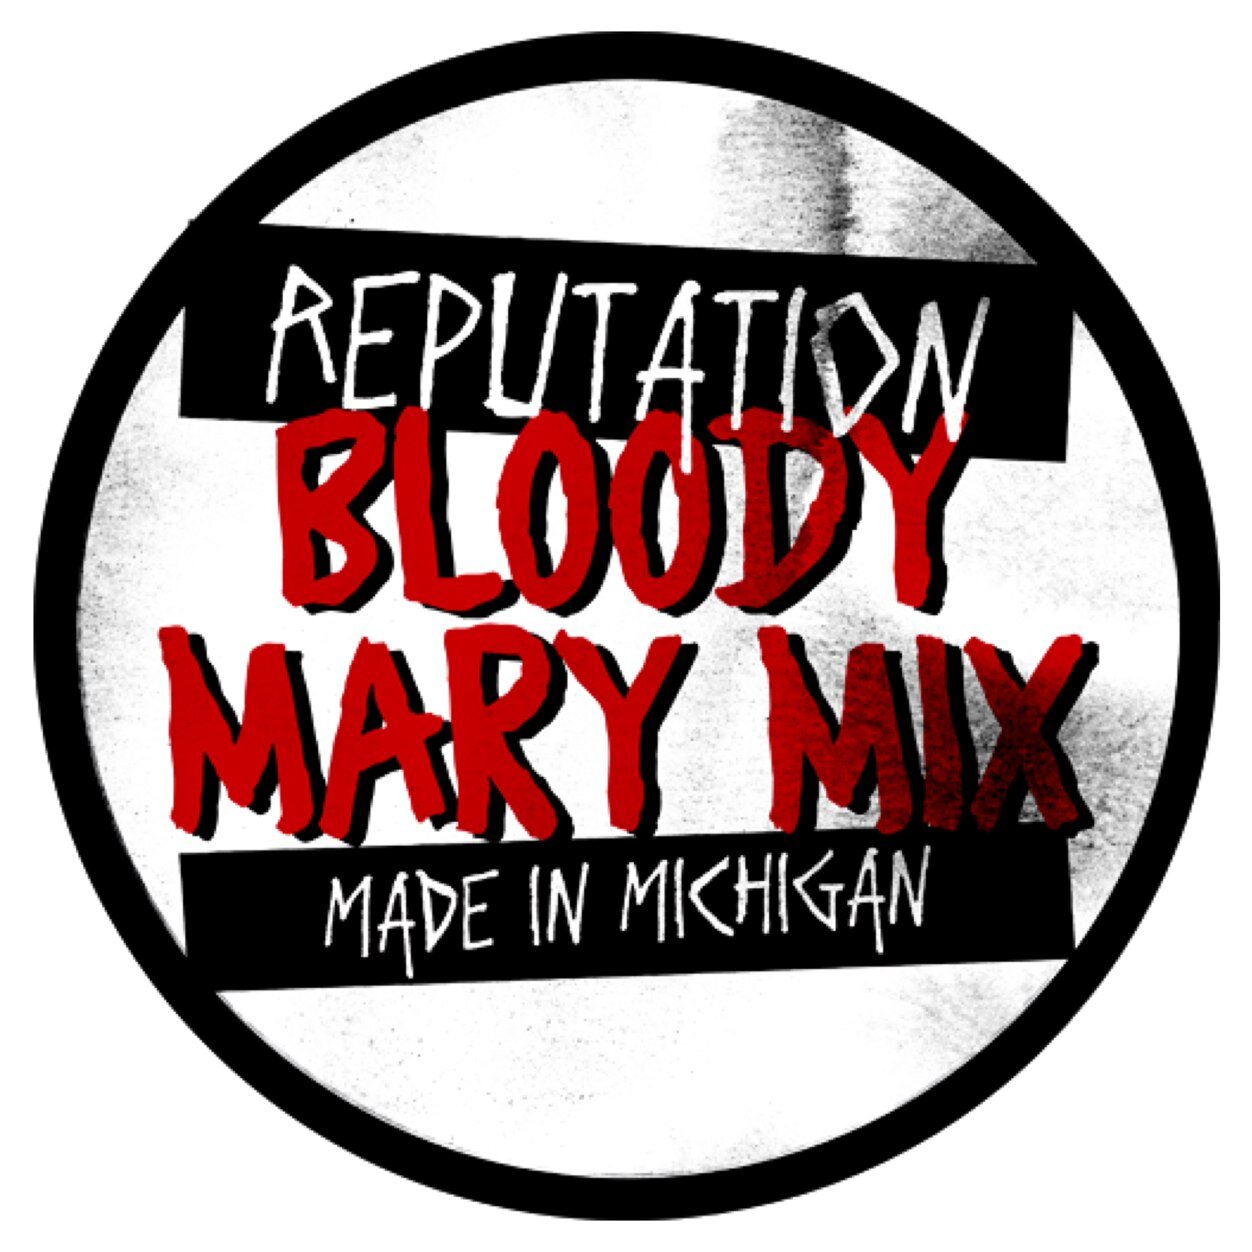 Craft Bloody Mary Mix made in Detroit, MI.